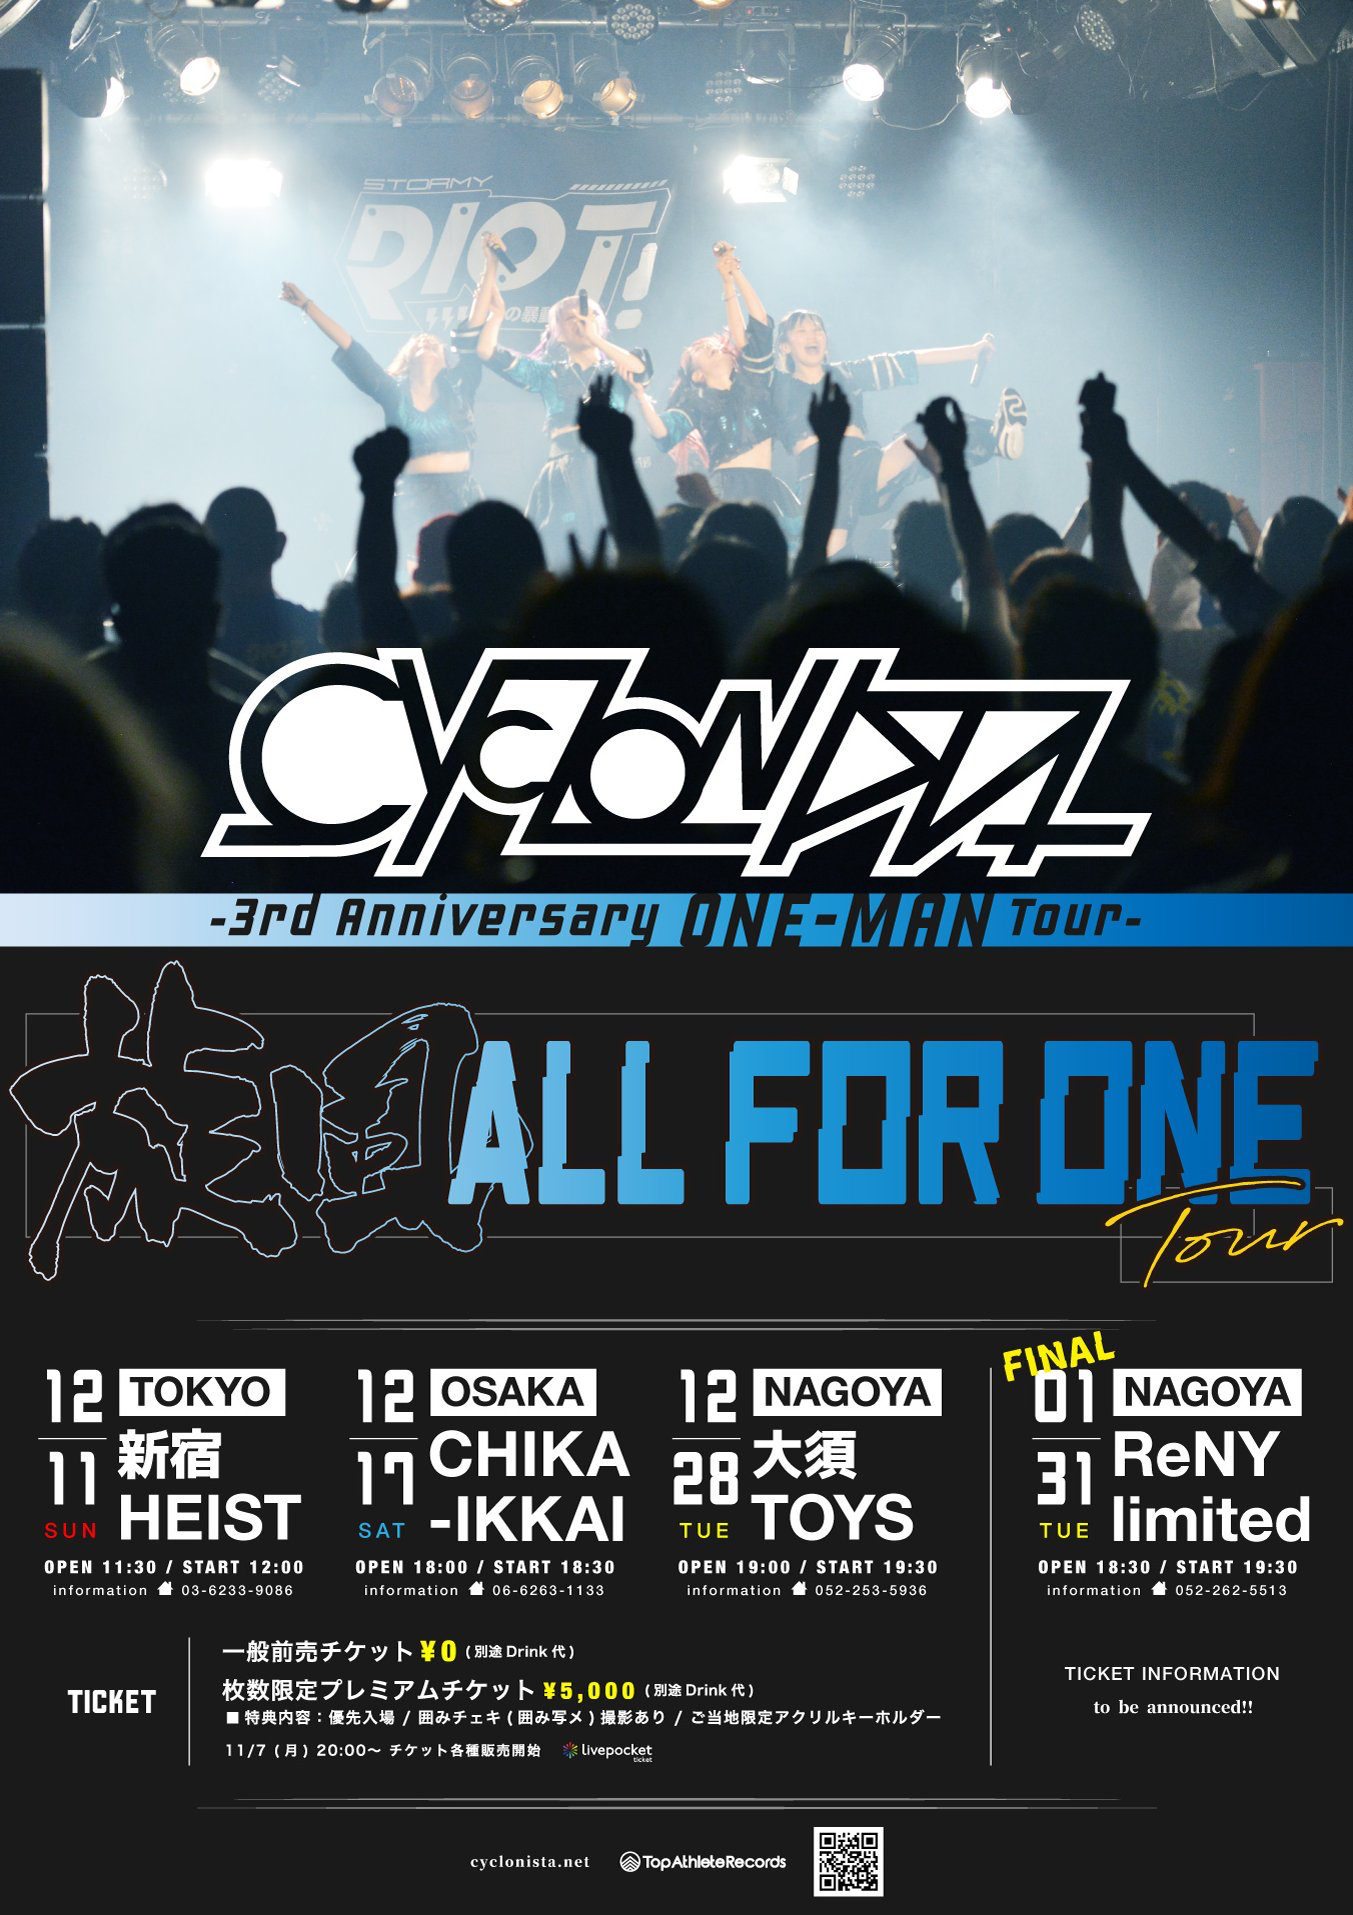 CYCLONISTA 3rd Annversary "旋風ALL FOR ONE Tour"